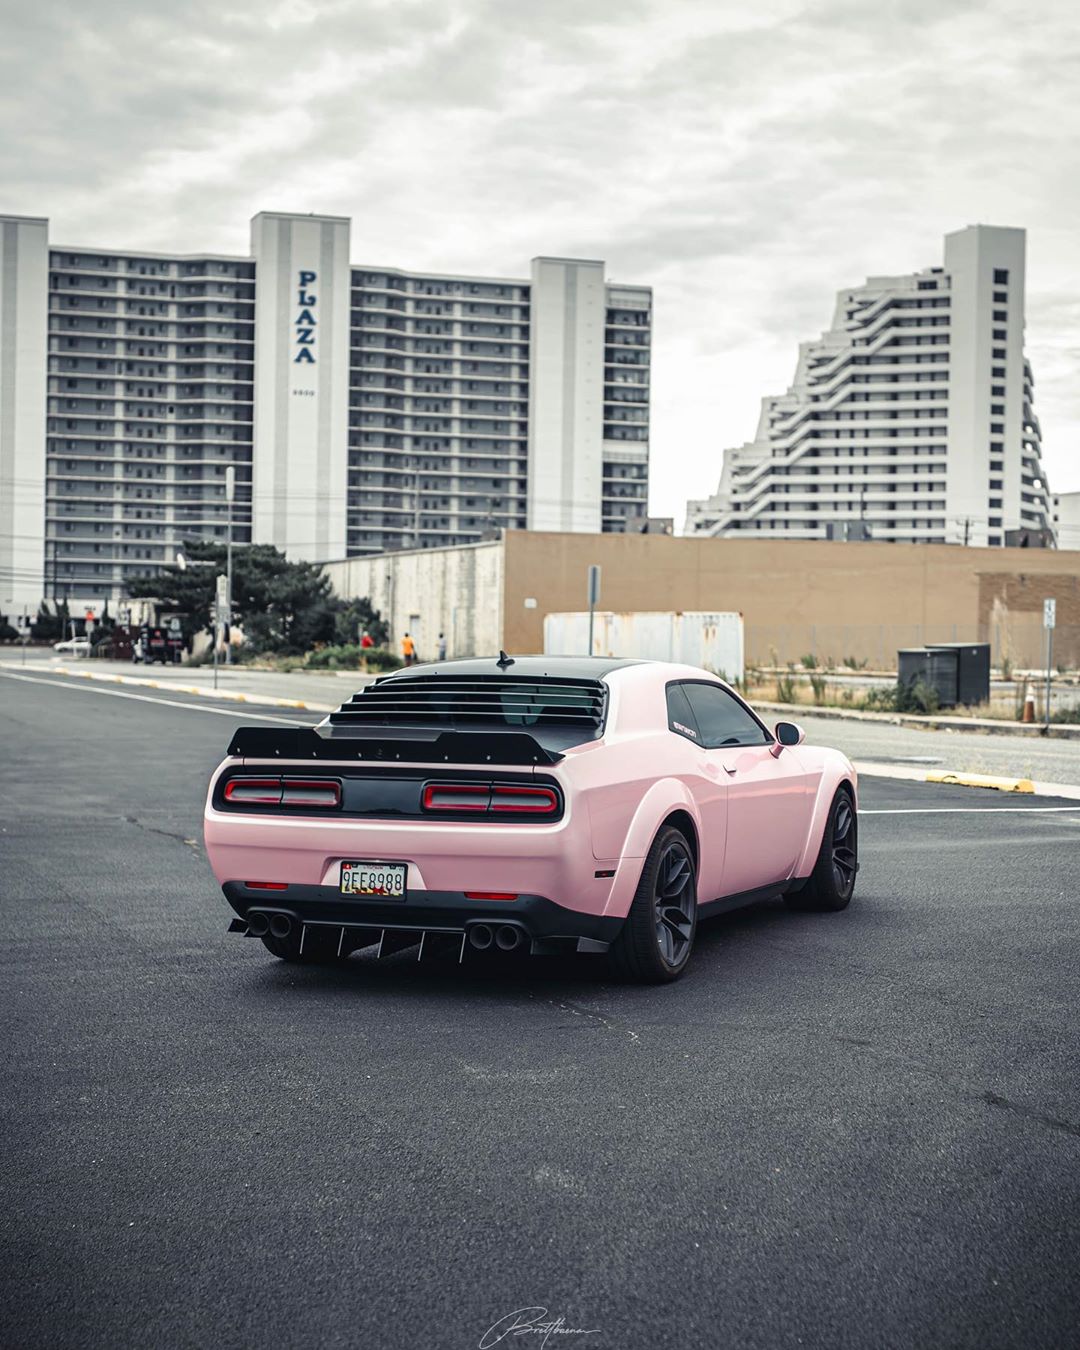 Dodge Challenger Pretty Pink Is Lady-Owned Muscle - autoevolution